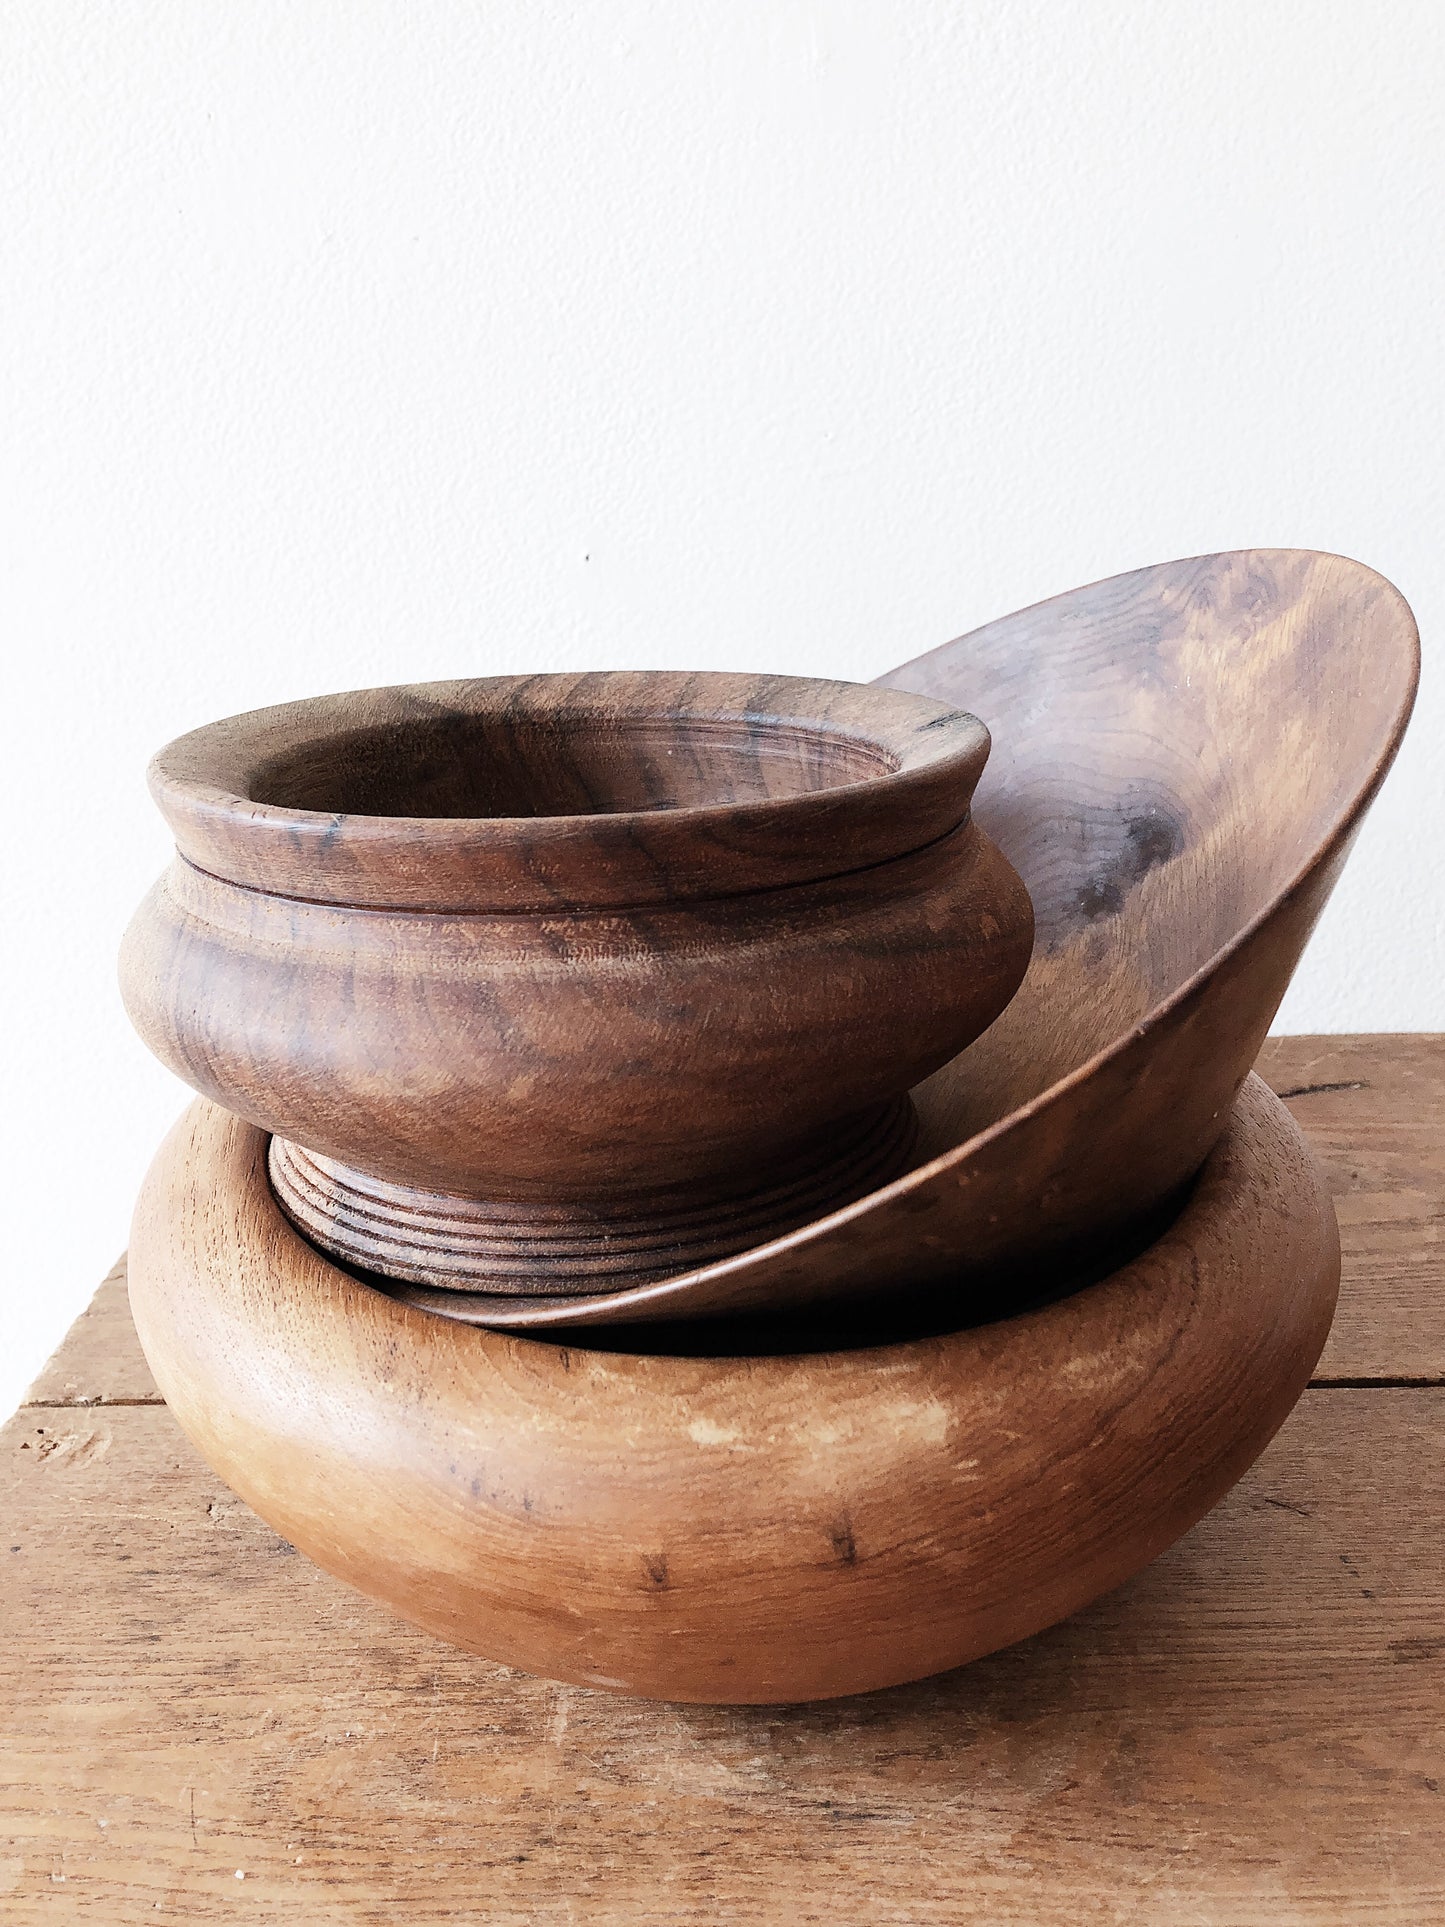 Vintage Wooden Bowl Collection